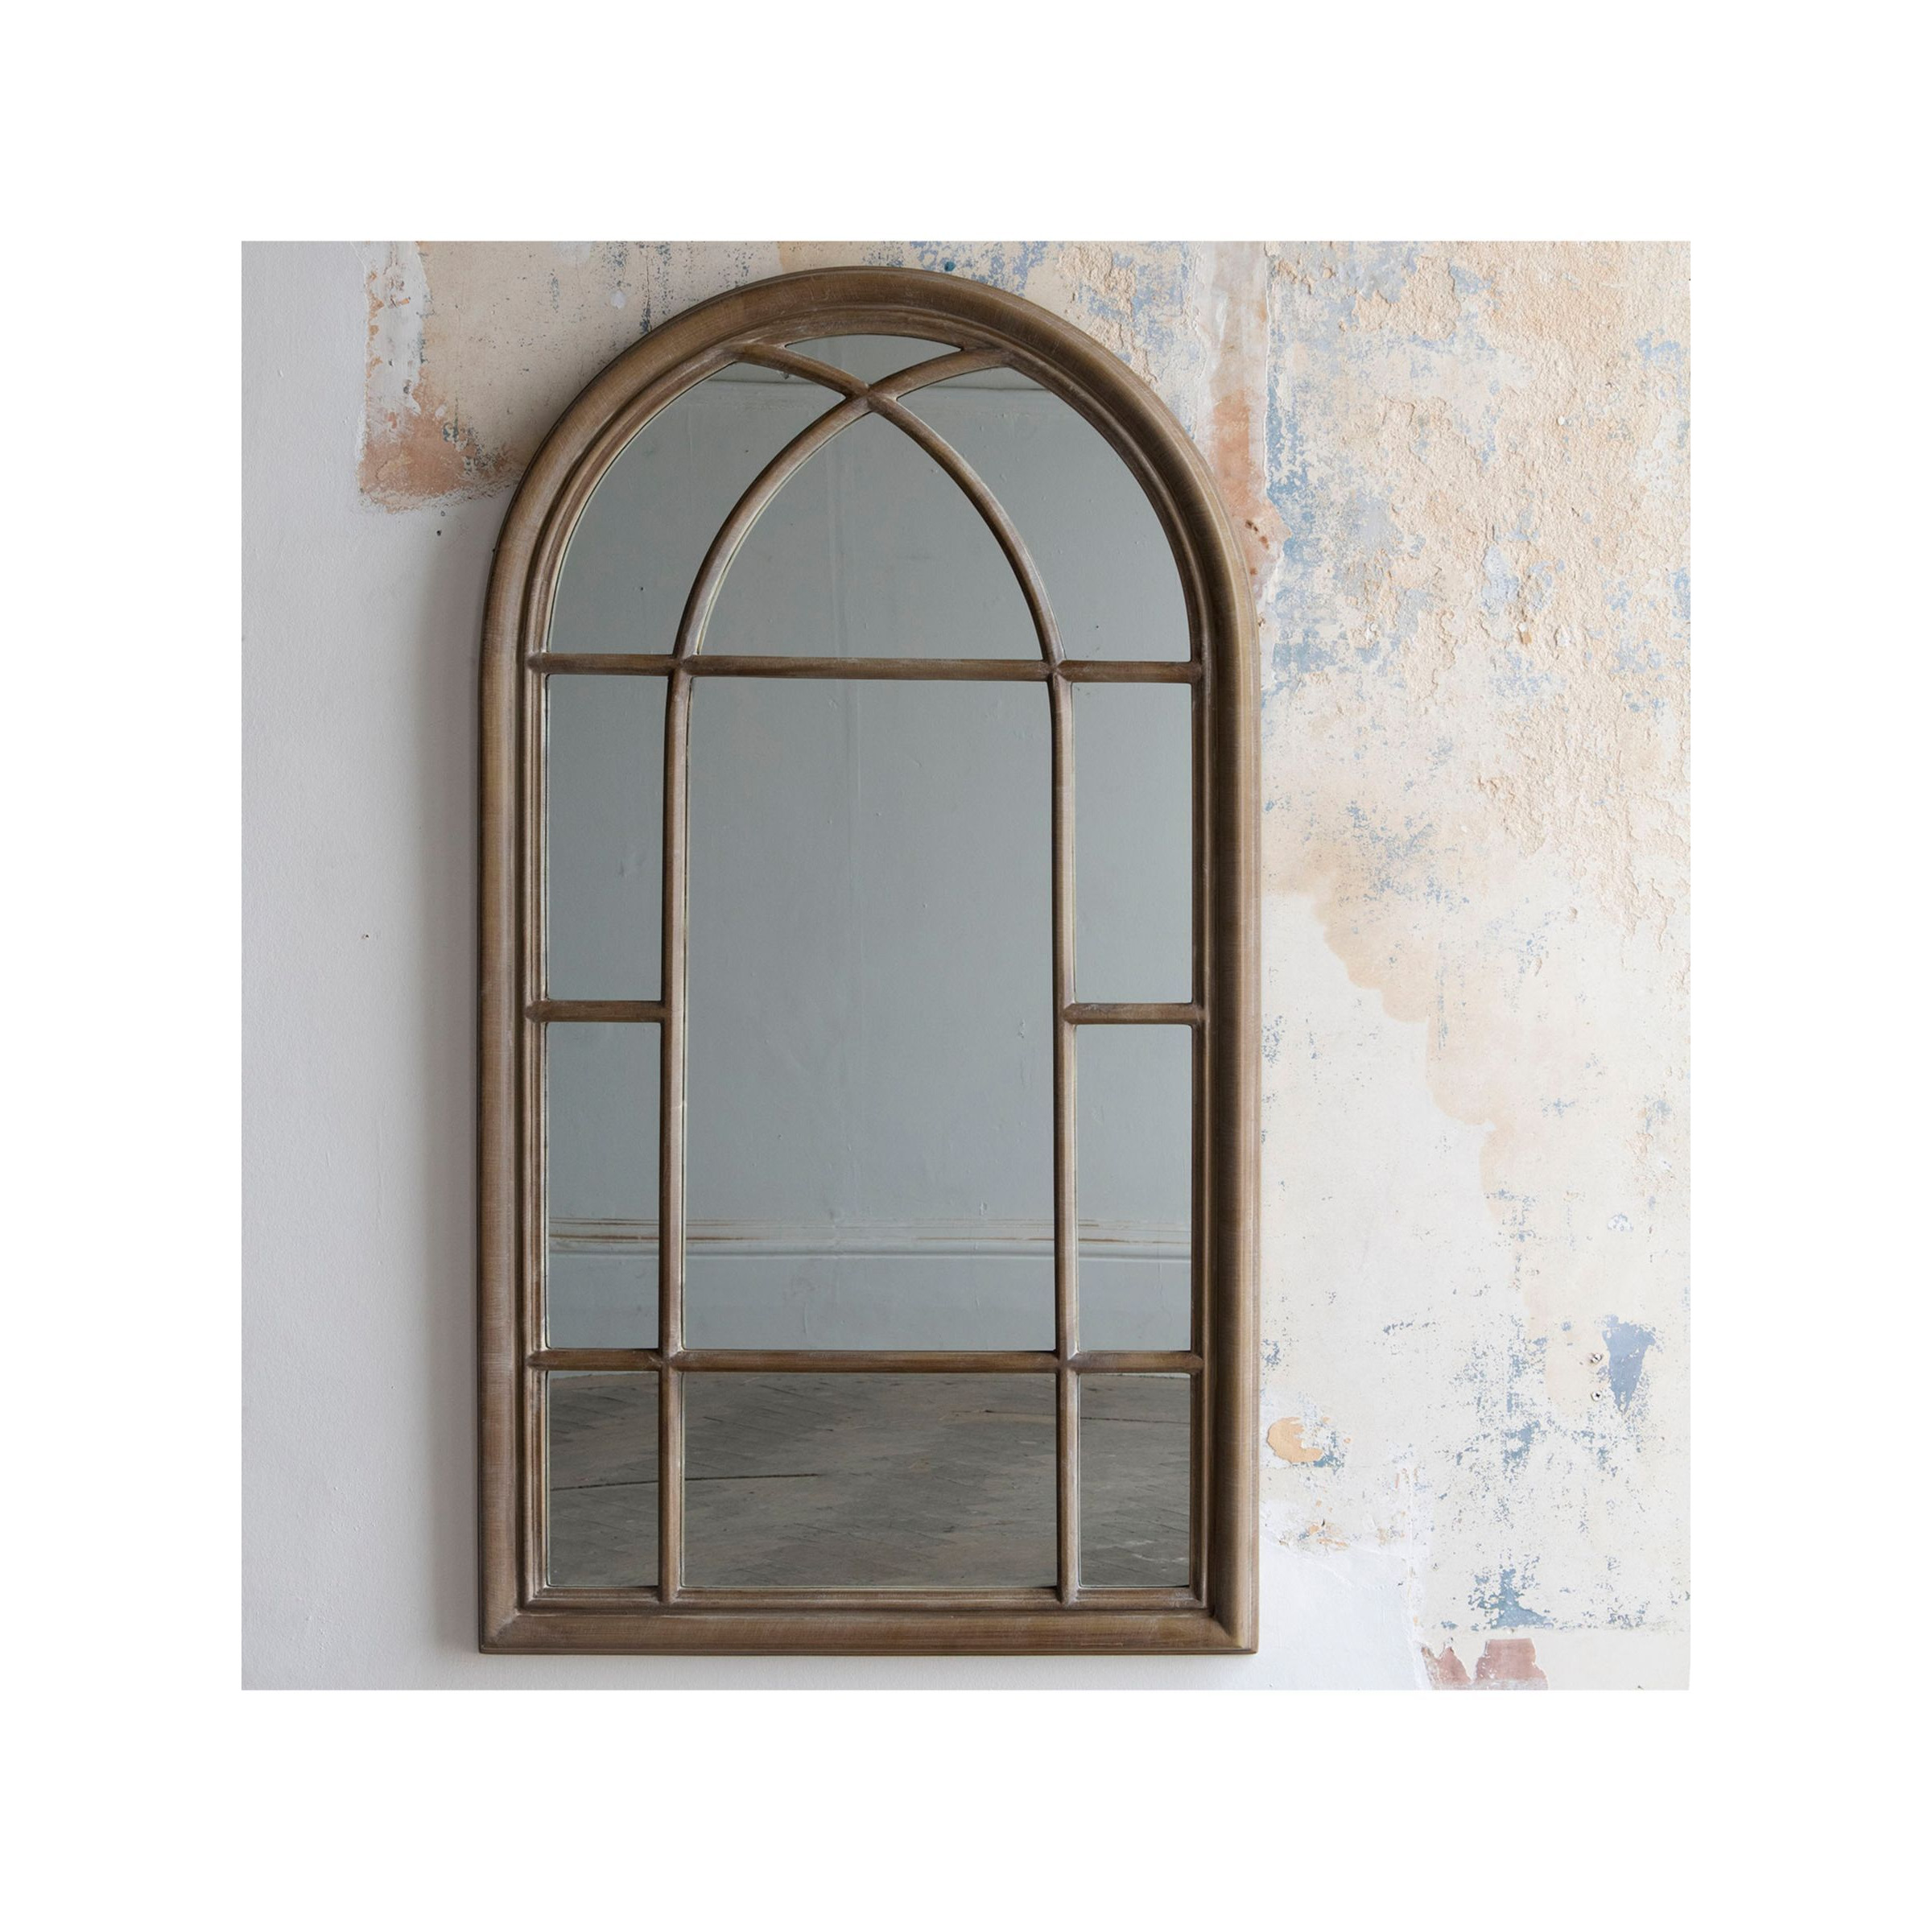 One.World Wilton Arched Window Wall Mirror, 140 x 80cm, Natural - image 1